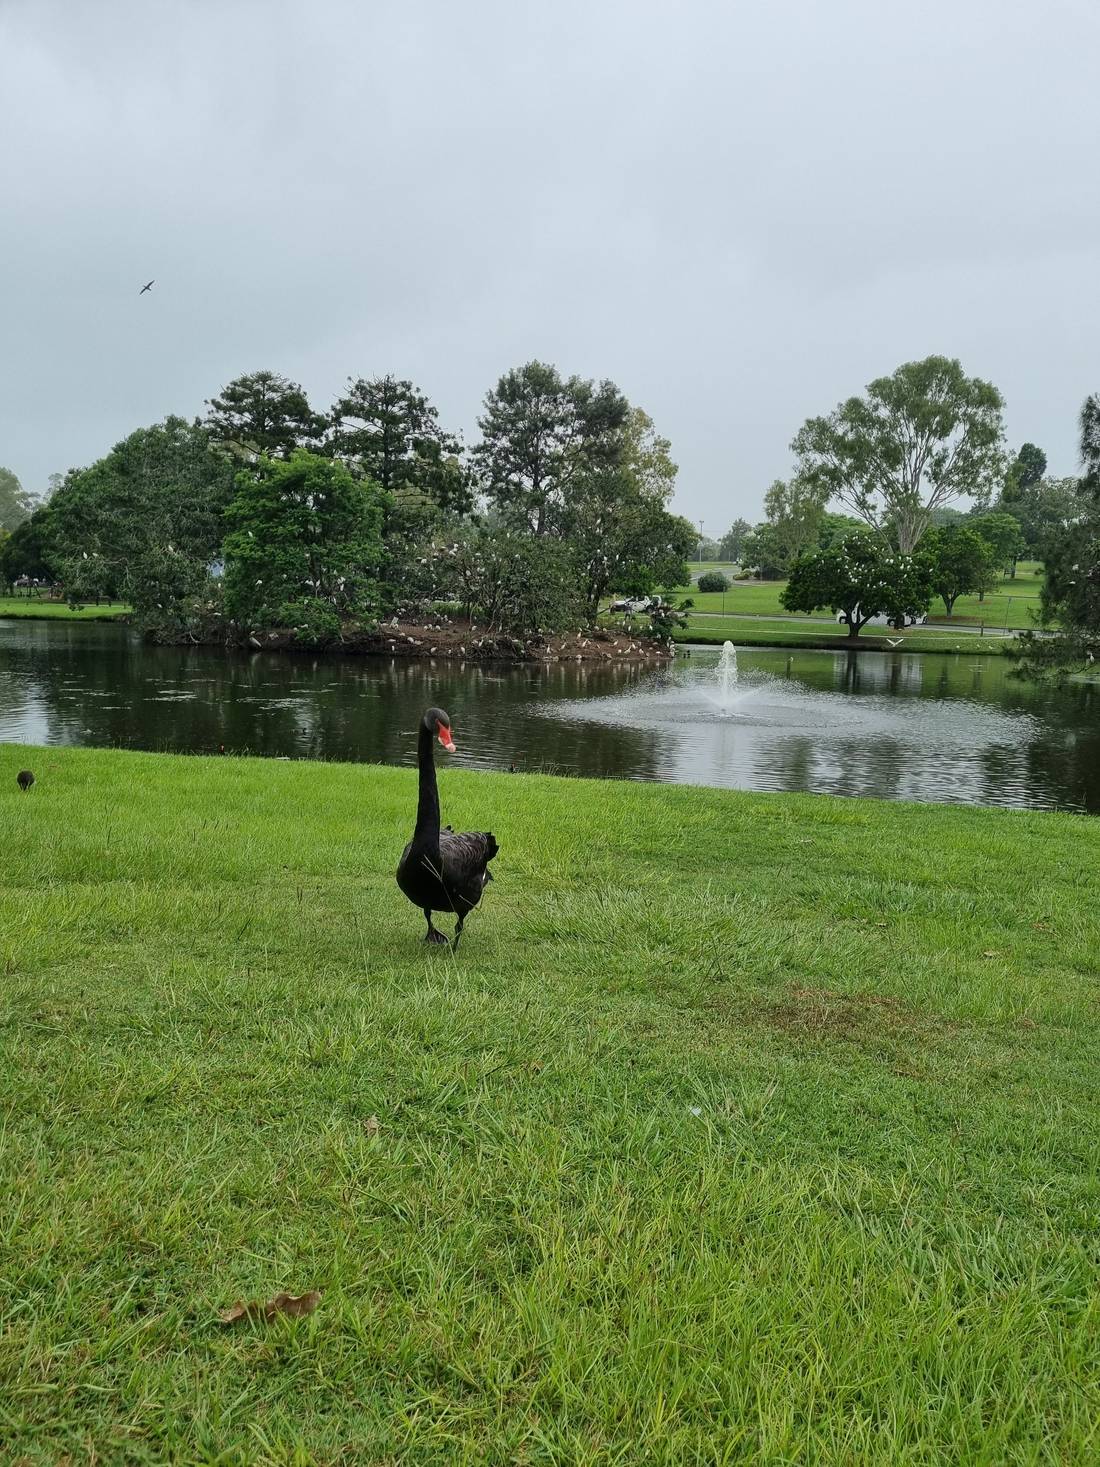 Thought I was in some trouble when this large Black Swan came marching towards me but I think they’re just used to being fed by human visitors to the park.